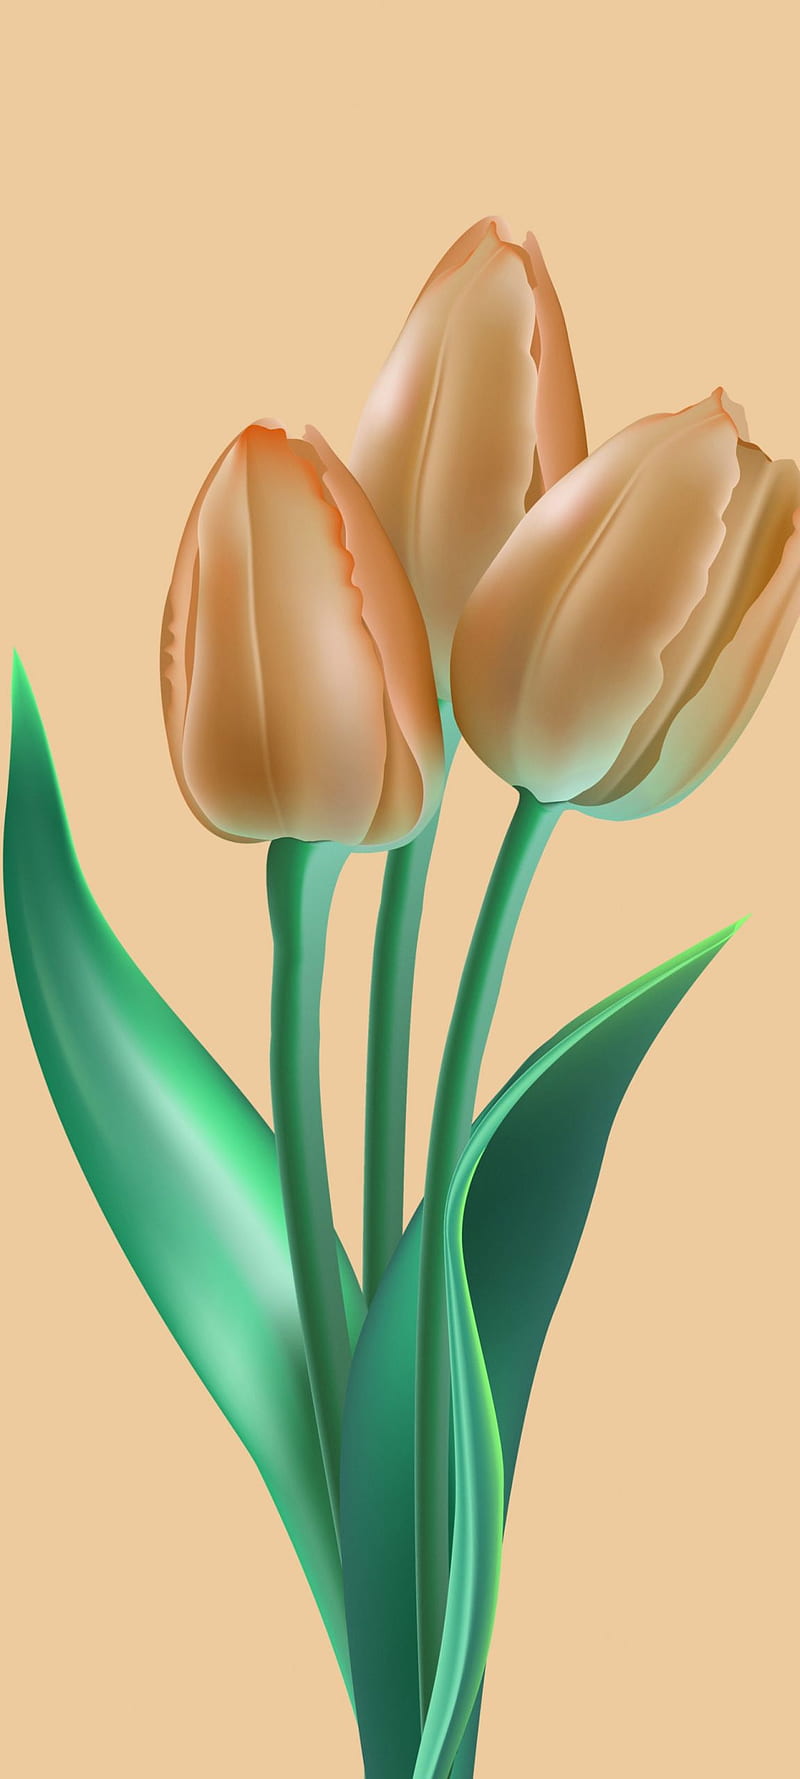 Android 12 1, giant white arum lily, Apple, amoled, art, one Plus, Android 12, flower, latest, HD phone wallpaper